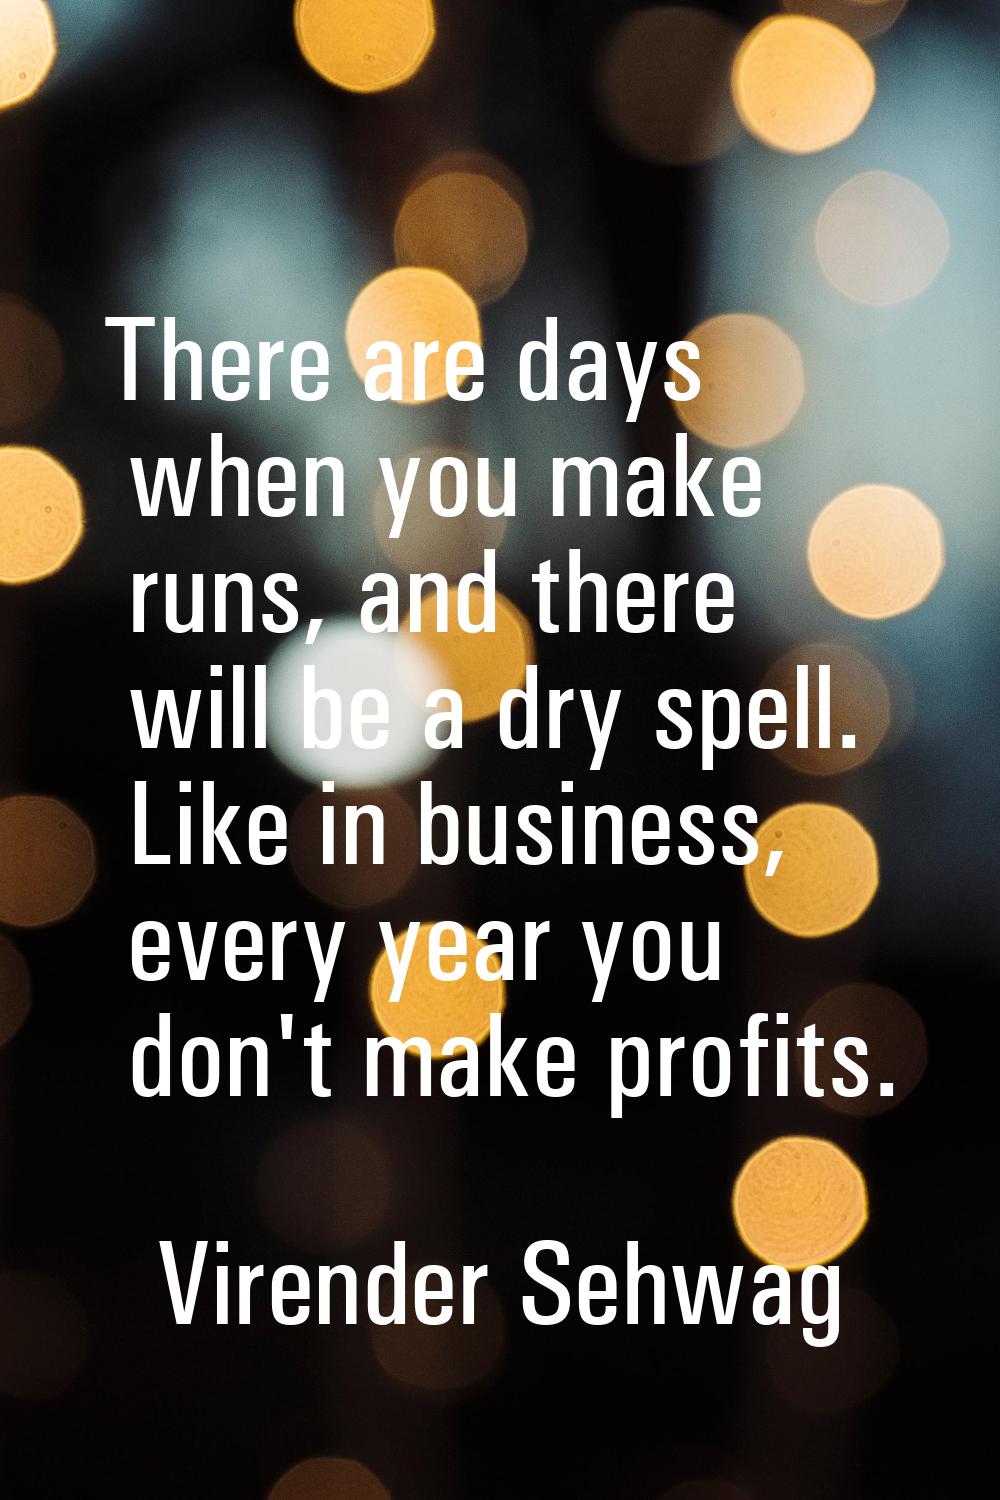 There are days when you make runs, and there will be a dry spell. Like in business, every year you 